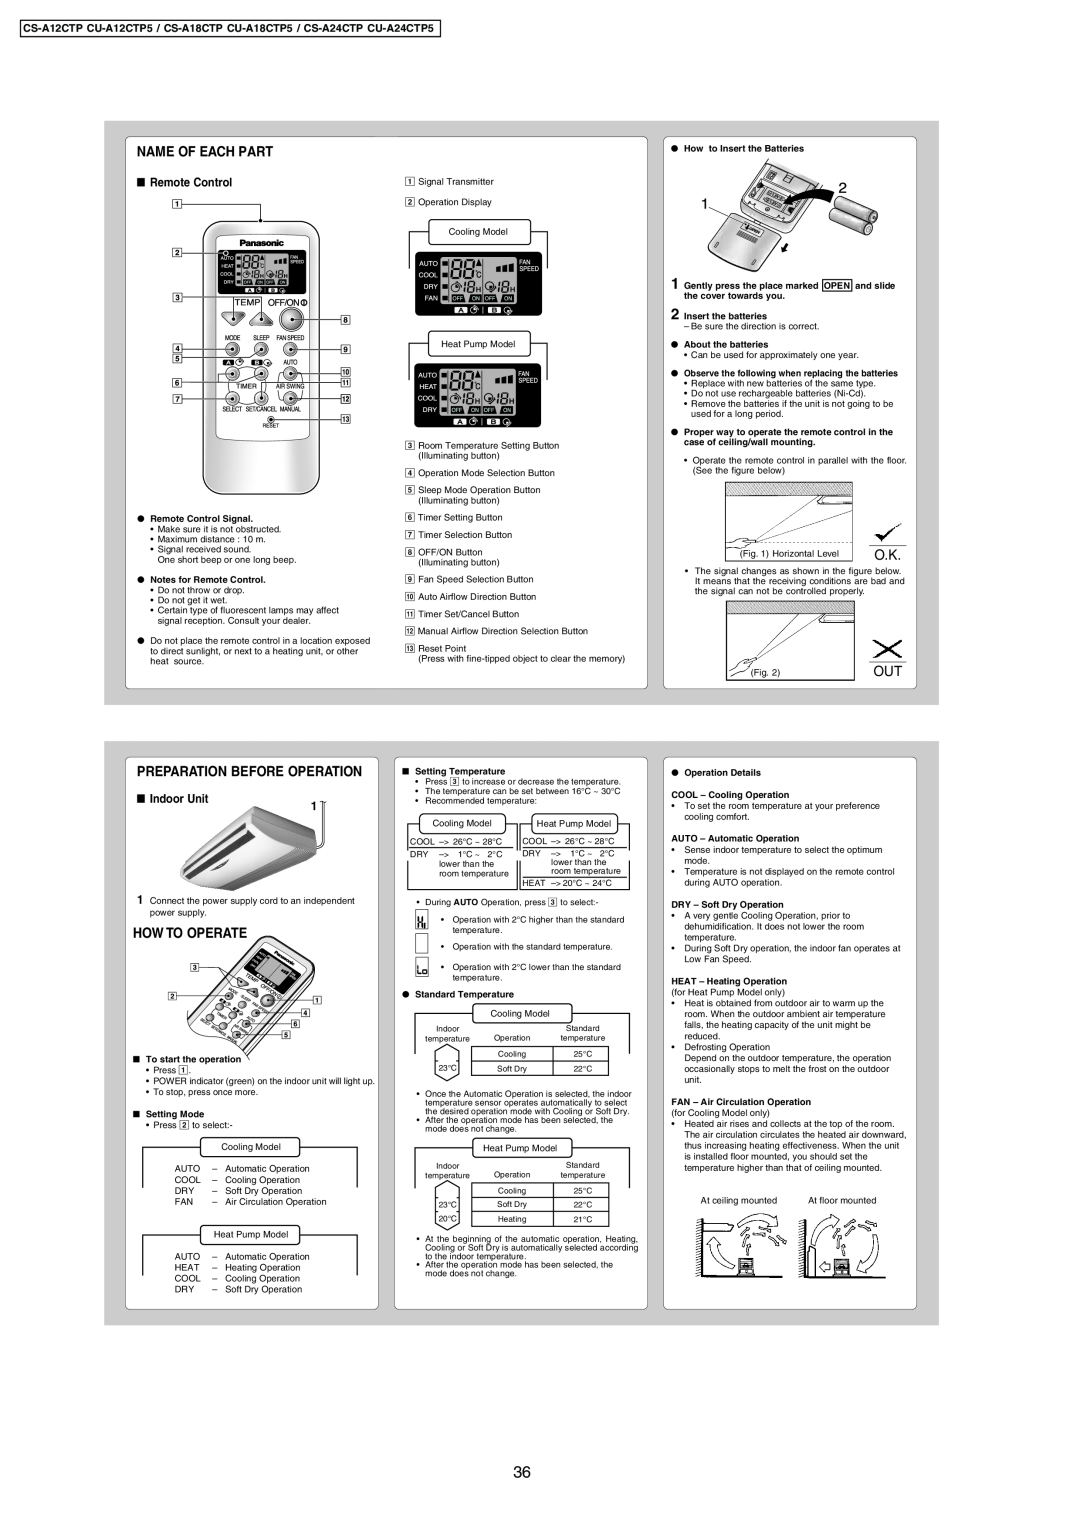 Panasonic CS/CU-A12CTP5 Preparation Before Operation, How To Operate, Remote Control, Indoor Unit, Name Of Each Part 